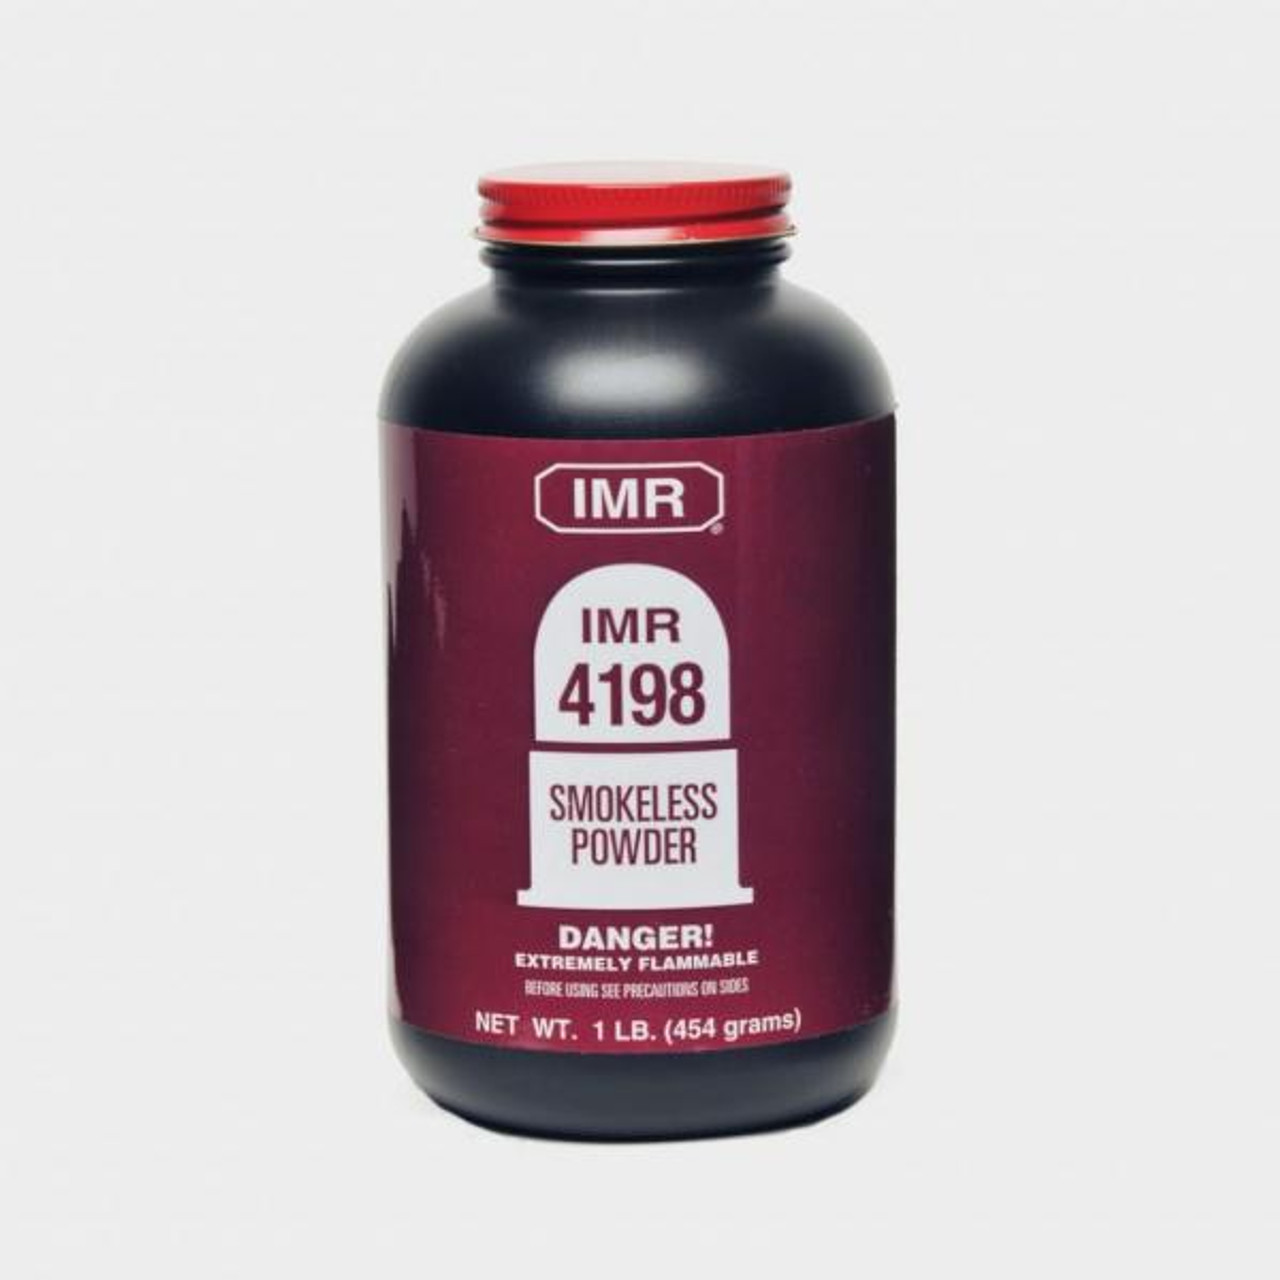 This fast-burning rifle powder gives outstanding performance in cartridges like the 222 Remington, 221 Fireball, 45-70, and 450 Marlin. It is also outstanding in cartridges like the 444 Marlin and 7.62 X 39. Varmint shooters with small-bore cartridges love it.

IMR recommends always consulting www.IMRReloading.com for the most accurate, up-to-date data.